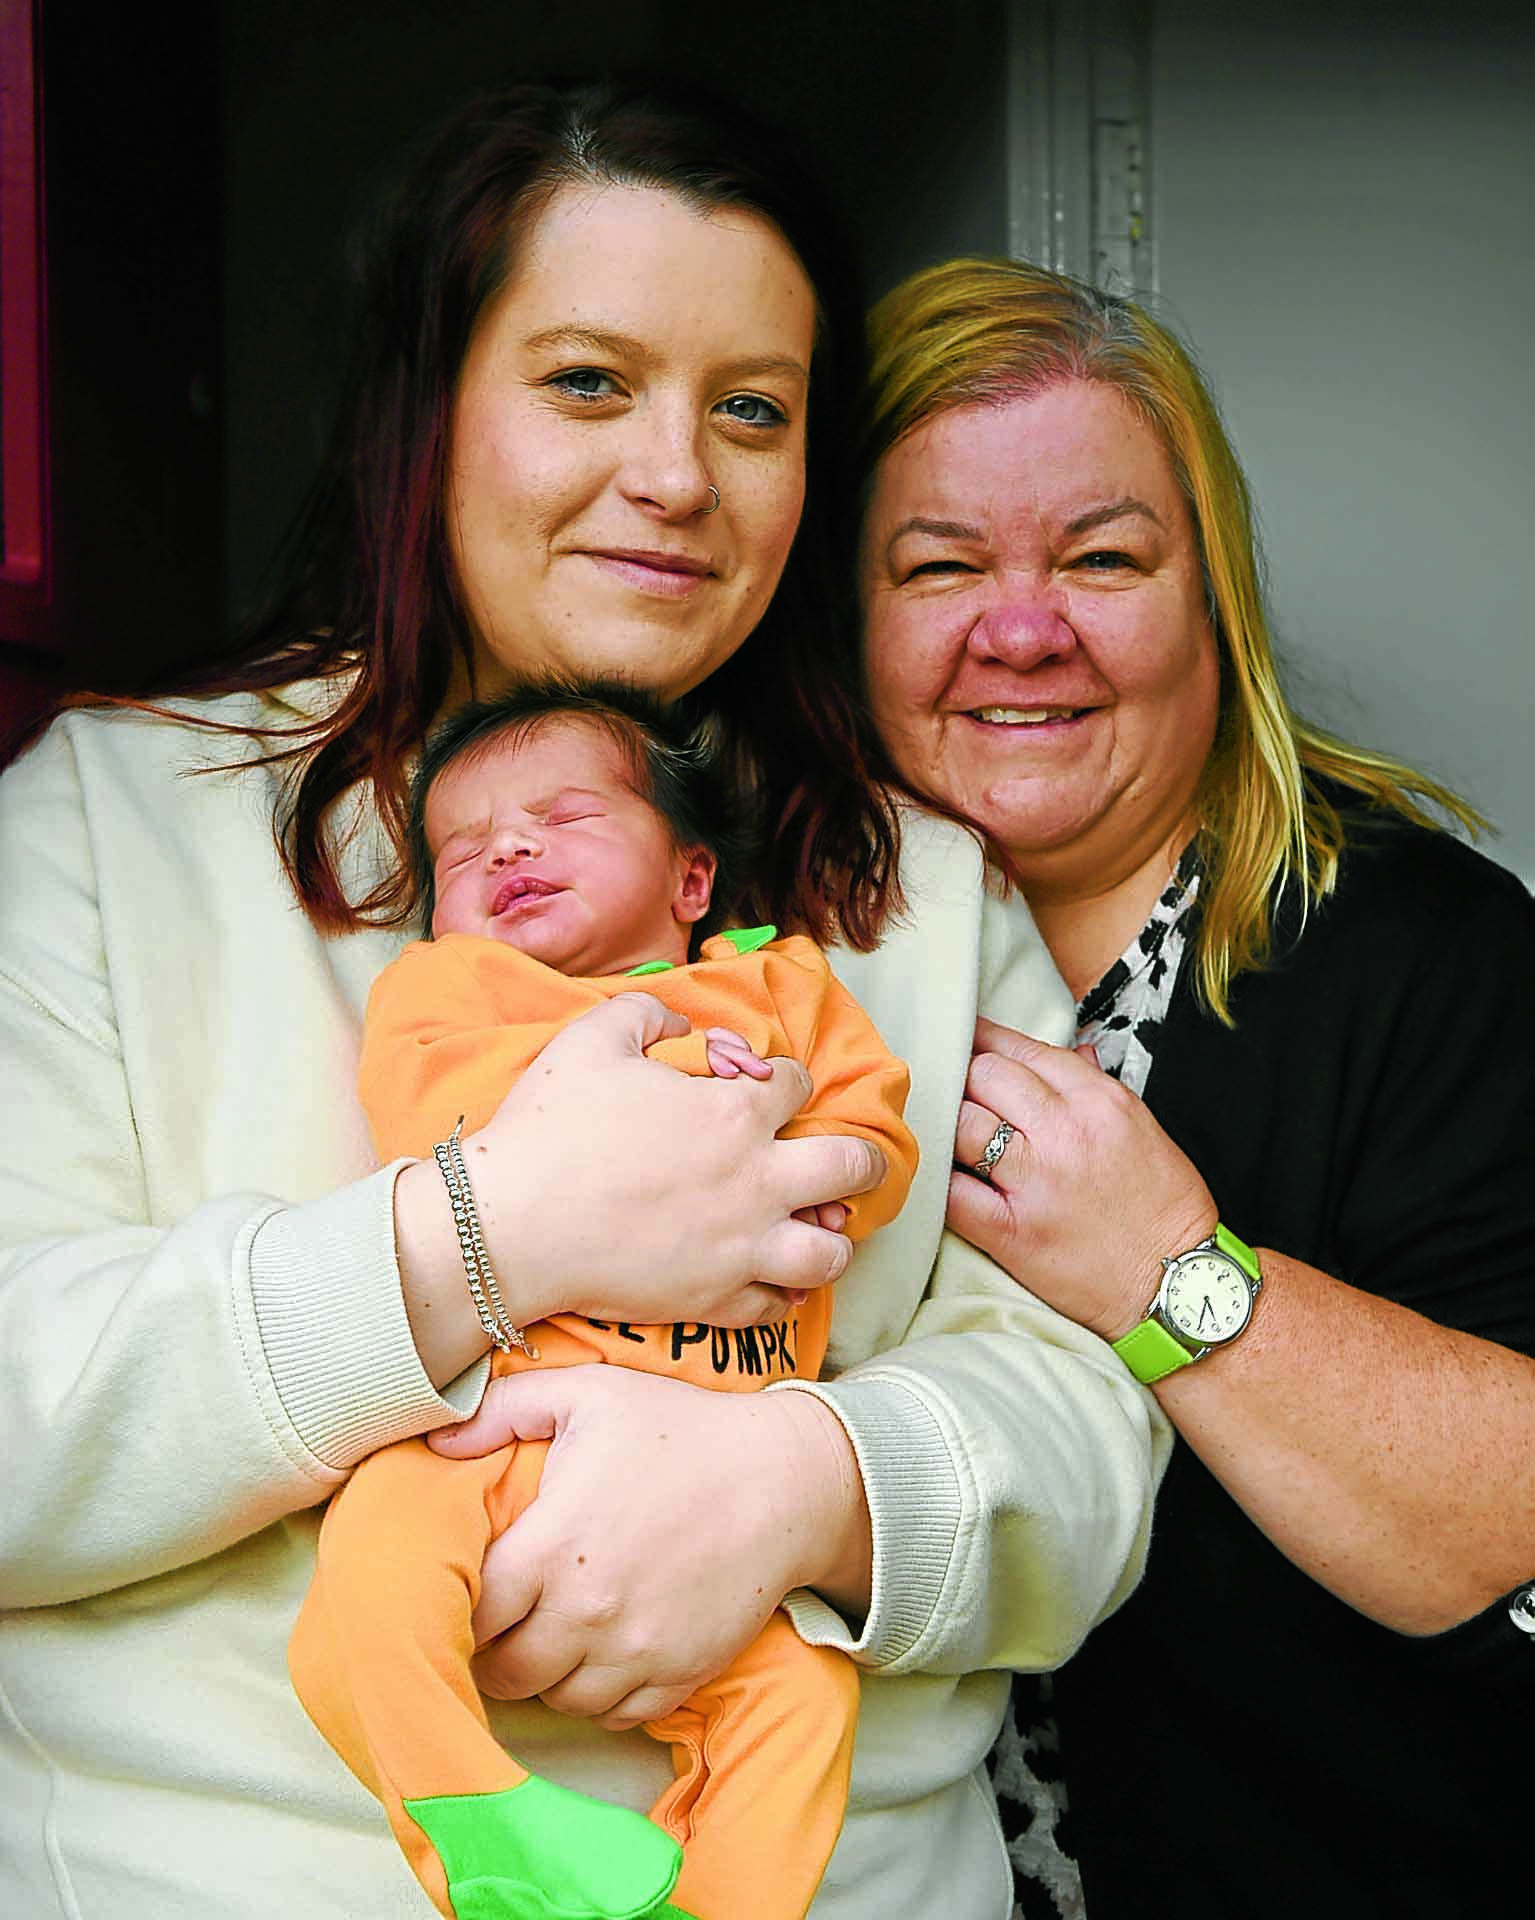 Gran delivers baby at side of A75